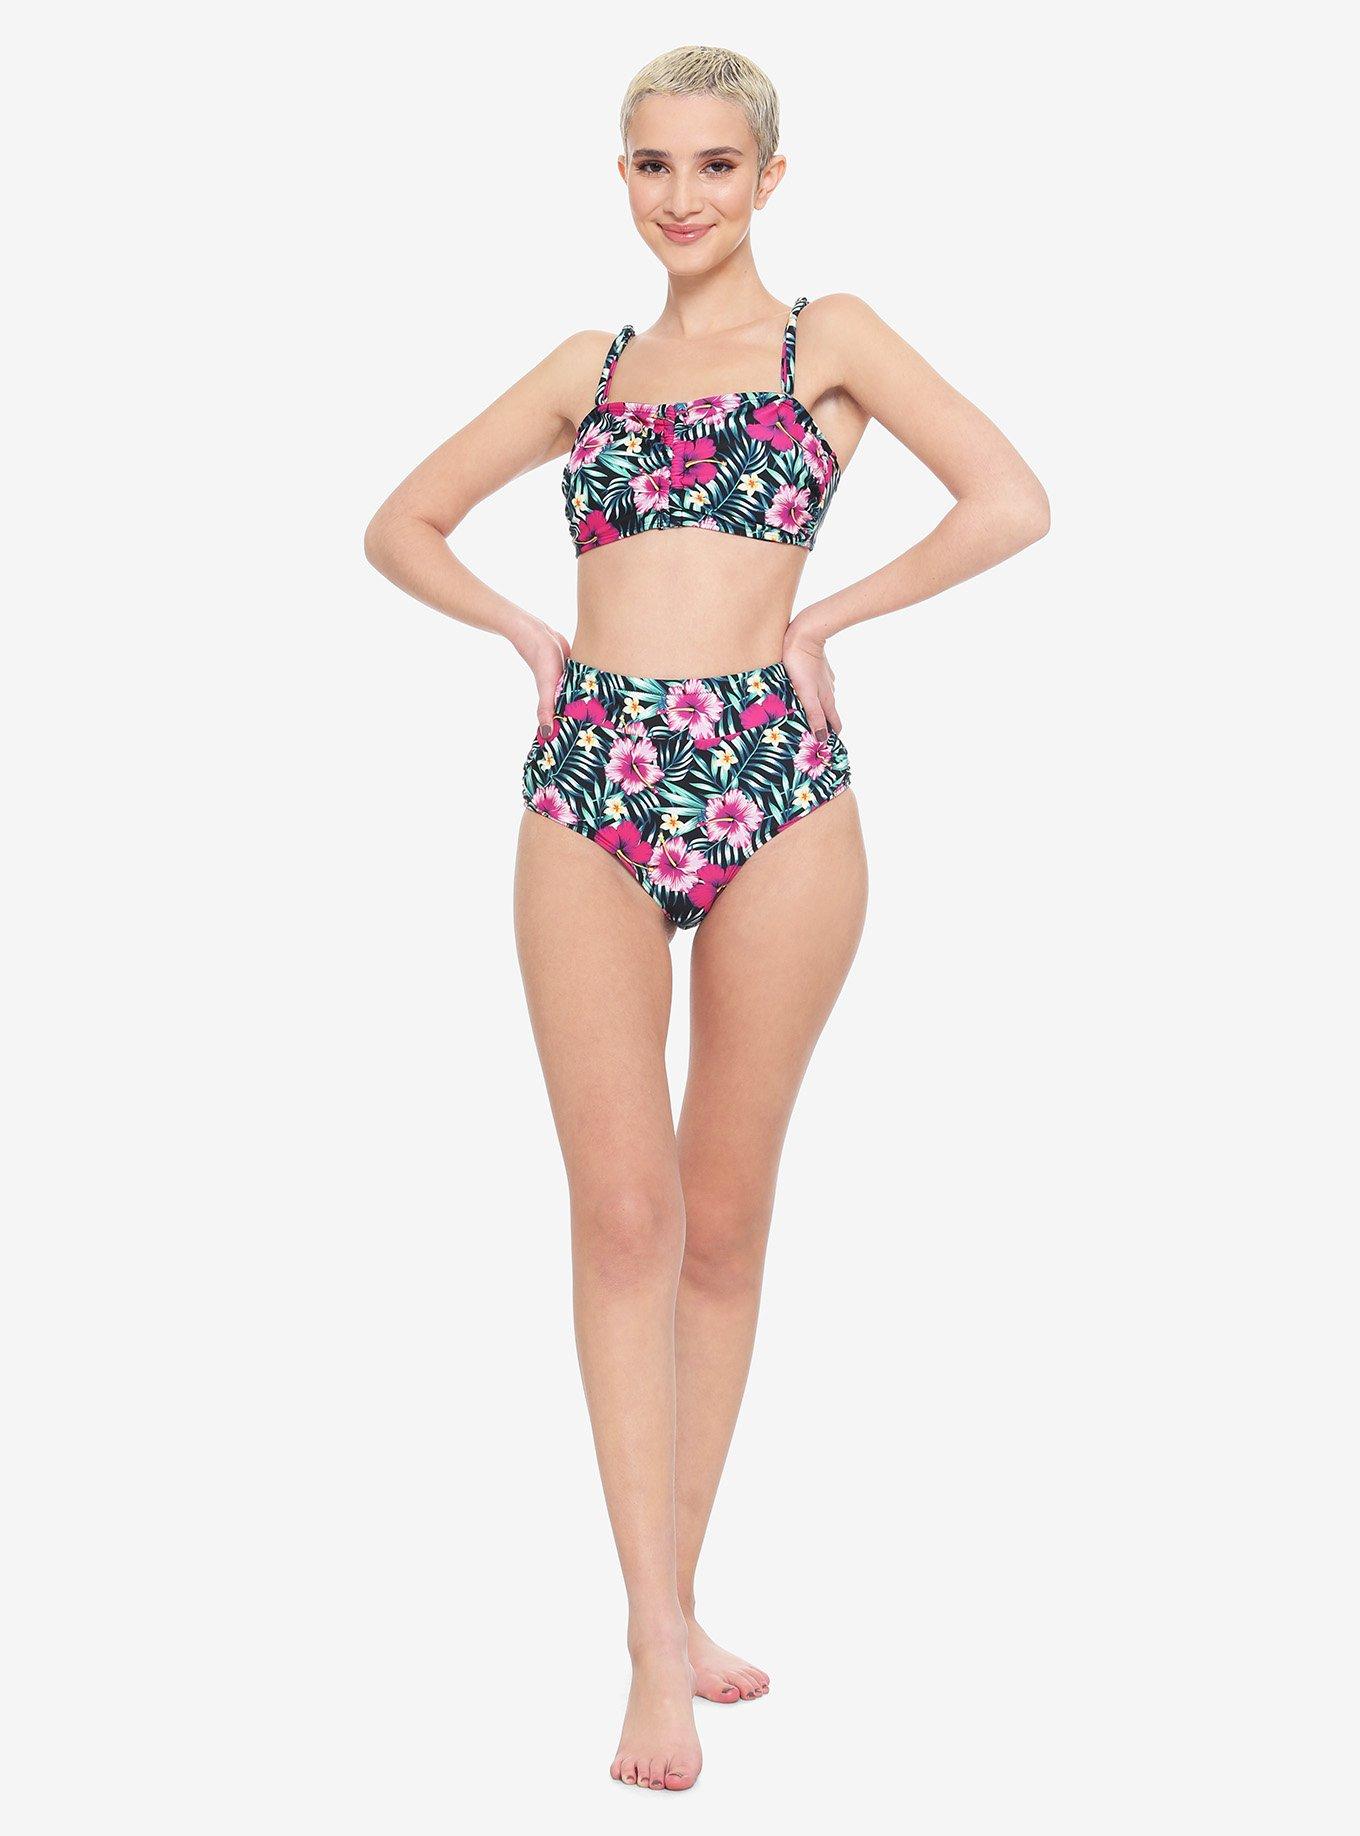 Pink Tropical Floral High-Waisted Swim Bottoms, MULTI, alternate